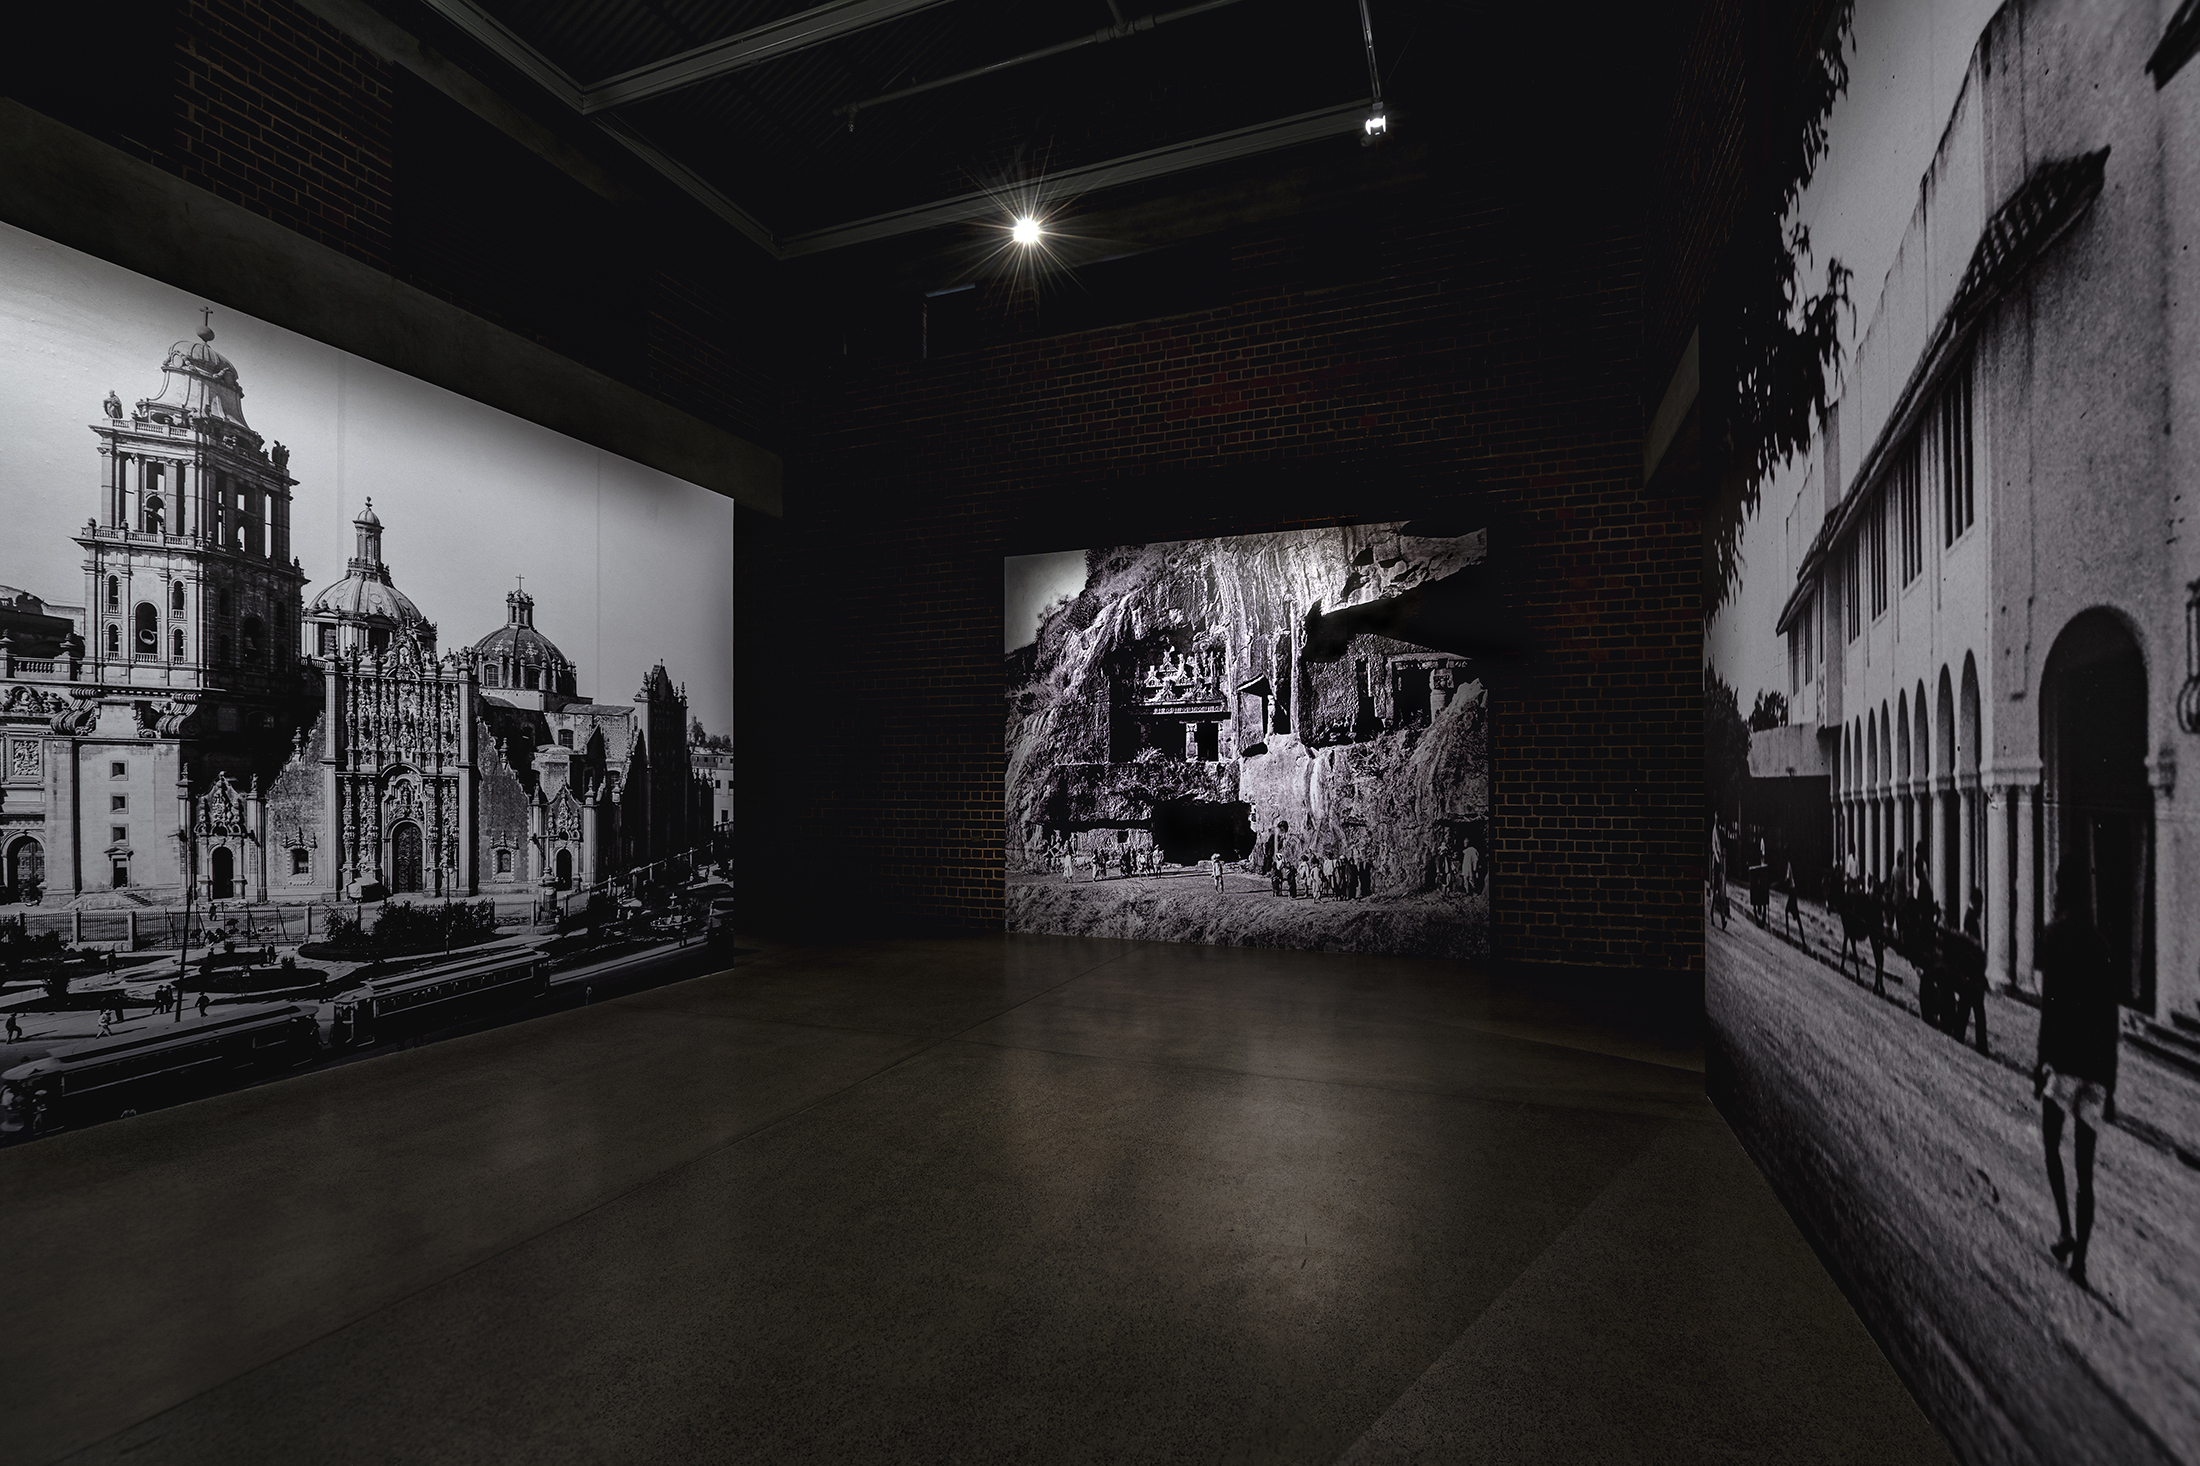 Installation view of Part 1 Historical Background. Image: Graham De Lacy